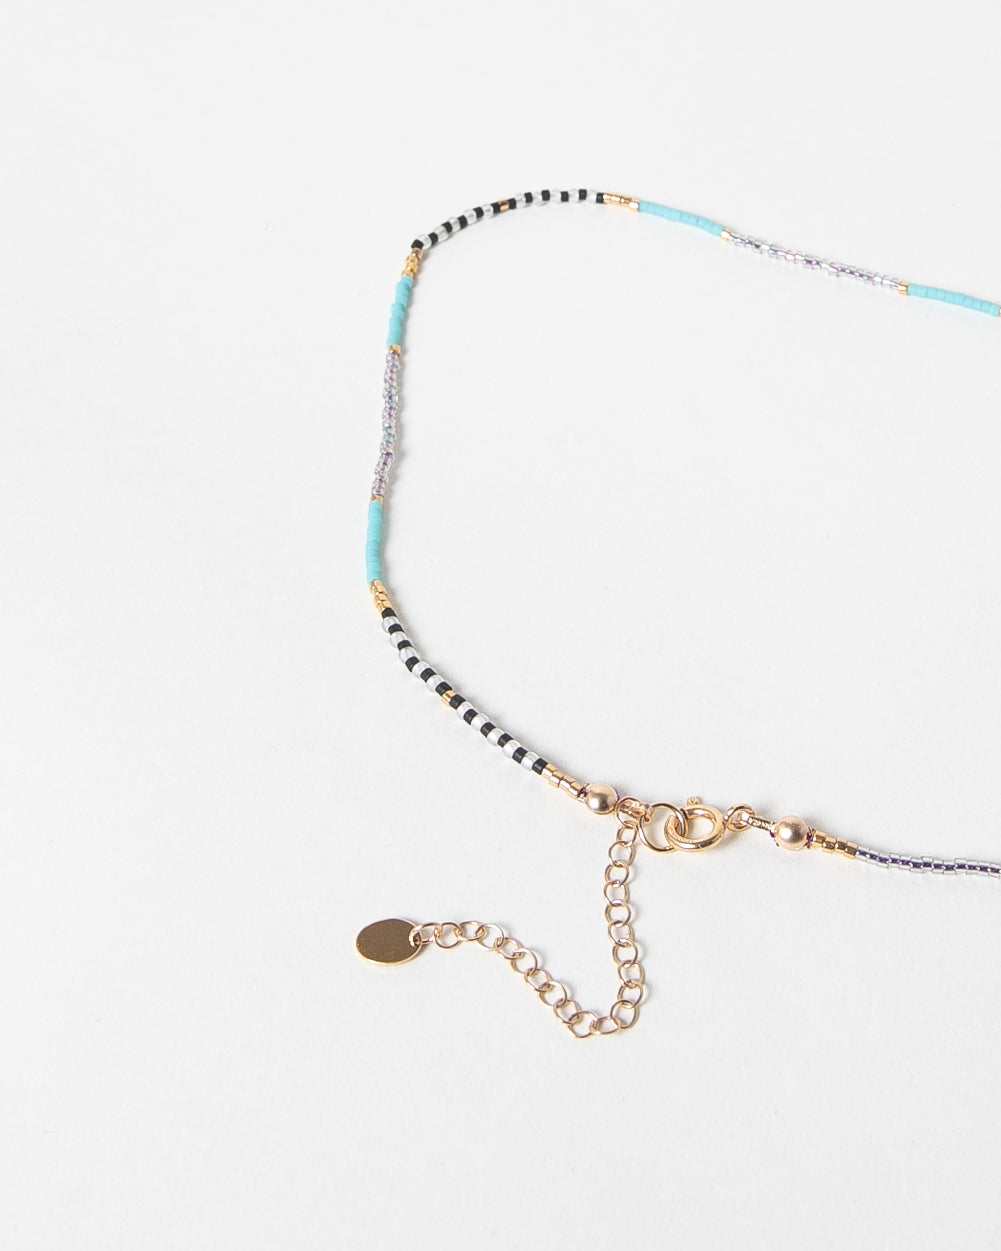 Delicate Miyuki Beaded Necklace in Turquoise and Gold